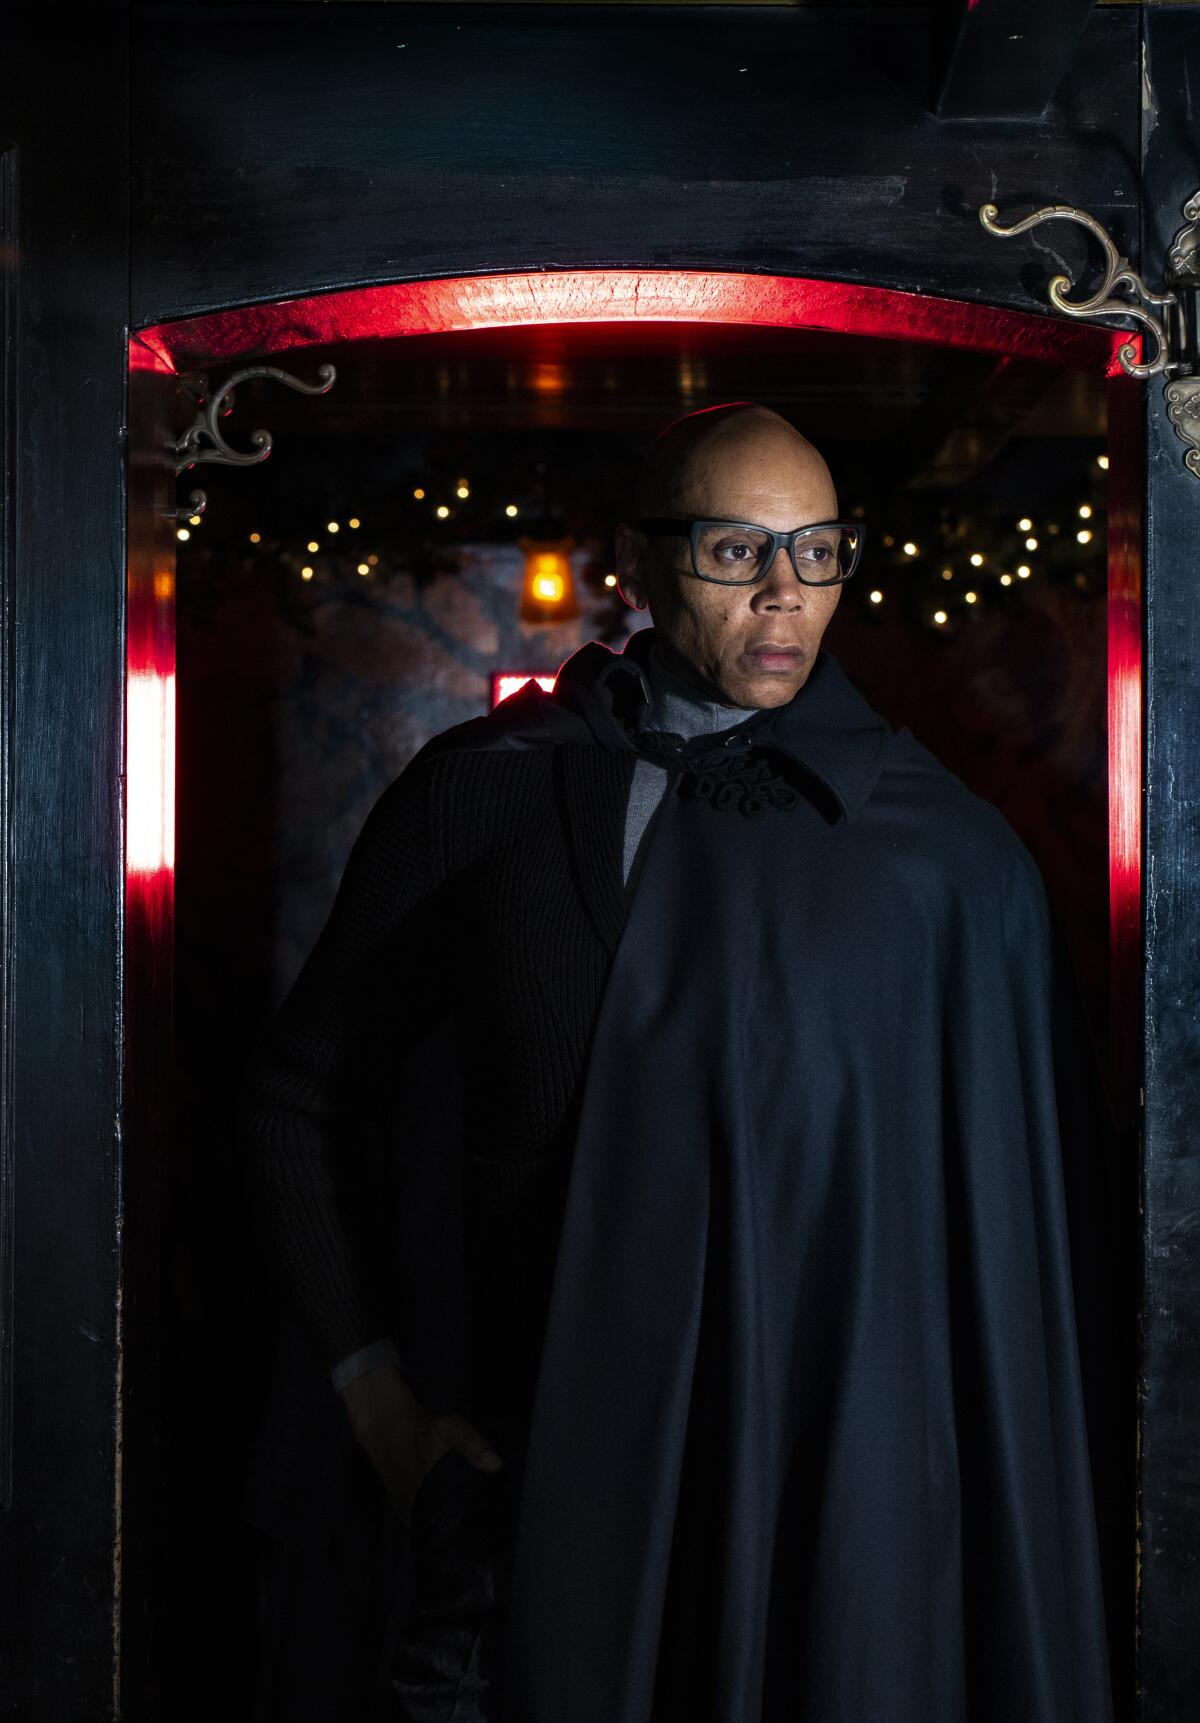 RuPaul, who is starring in the new Netflix series "AJ and the Queen," photographed at the Waverly Inn in New York City.